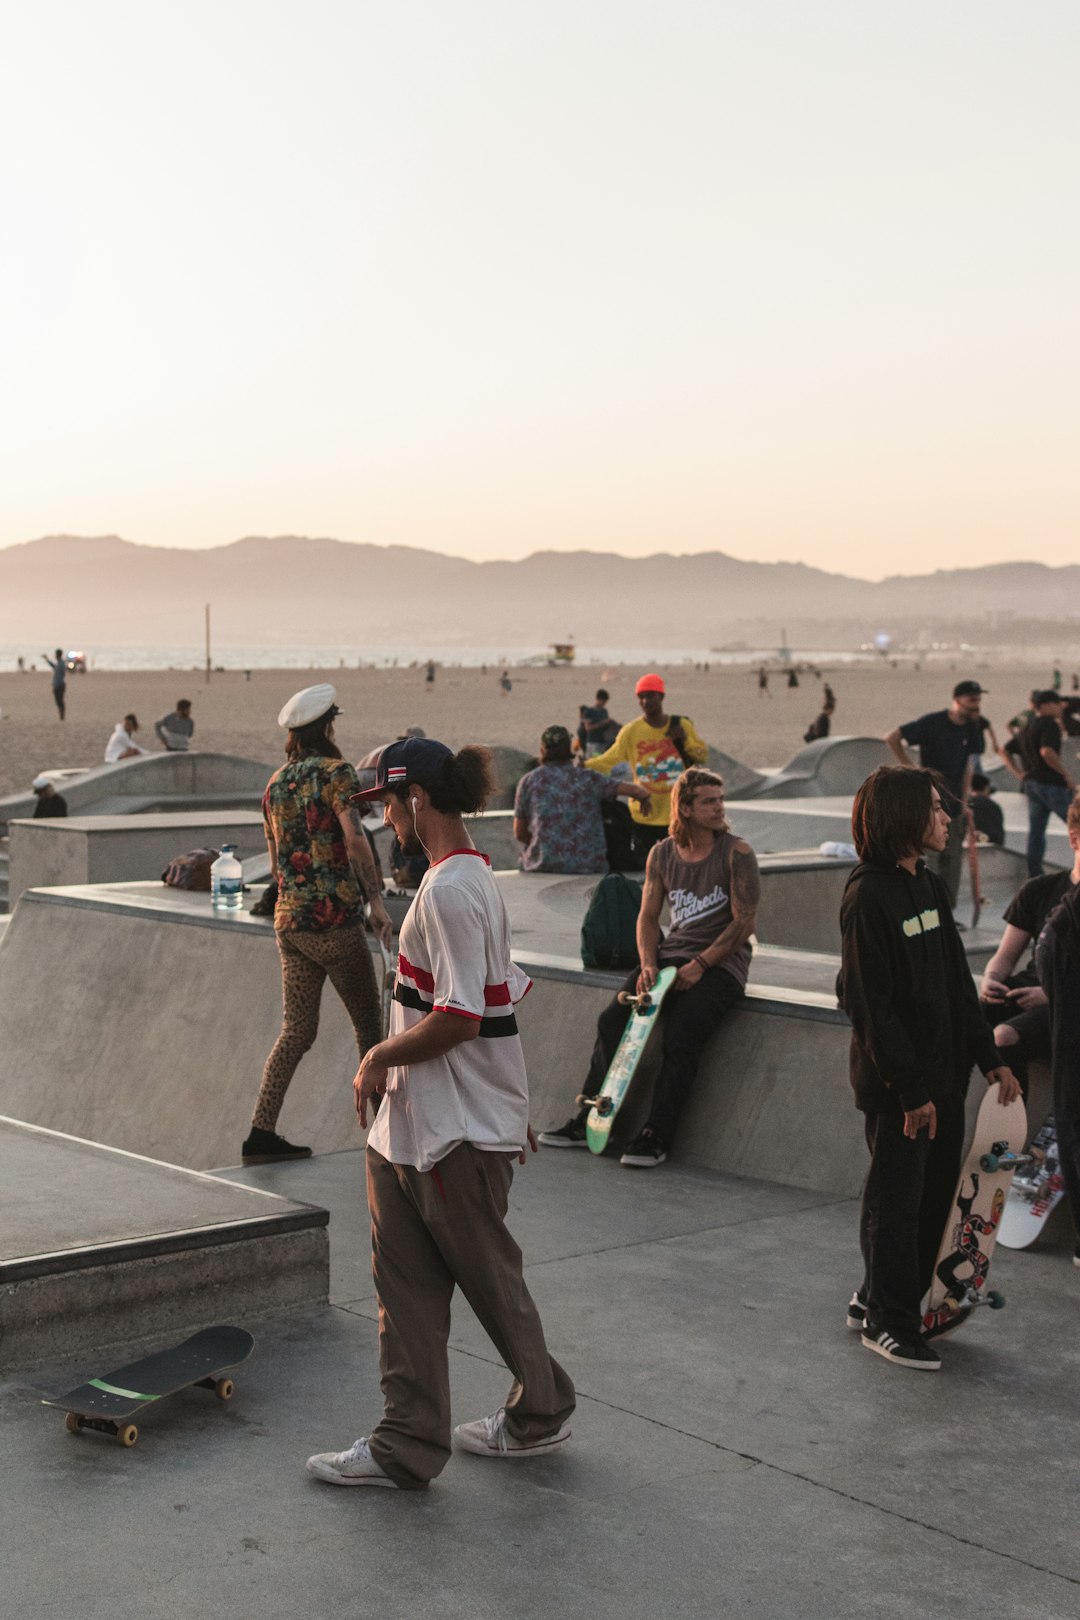 people gathered with skateboards